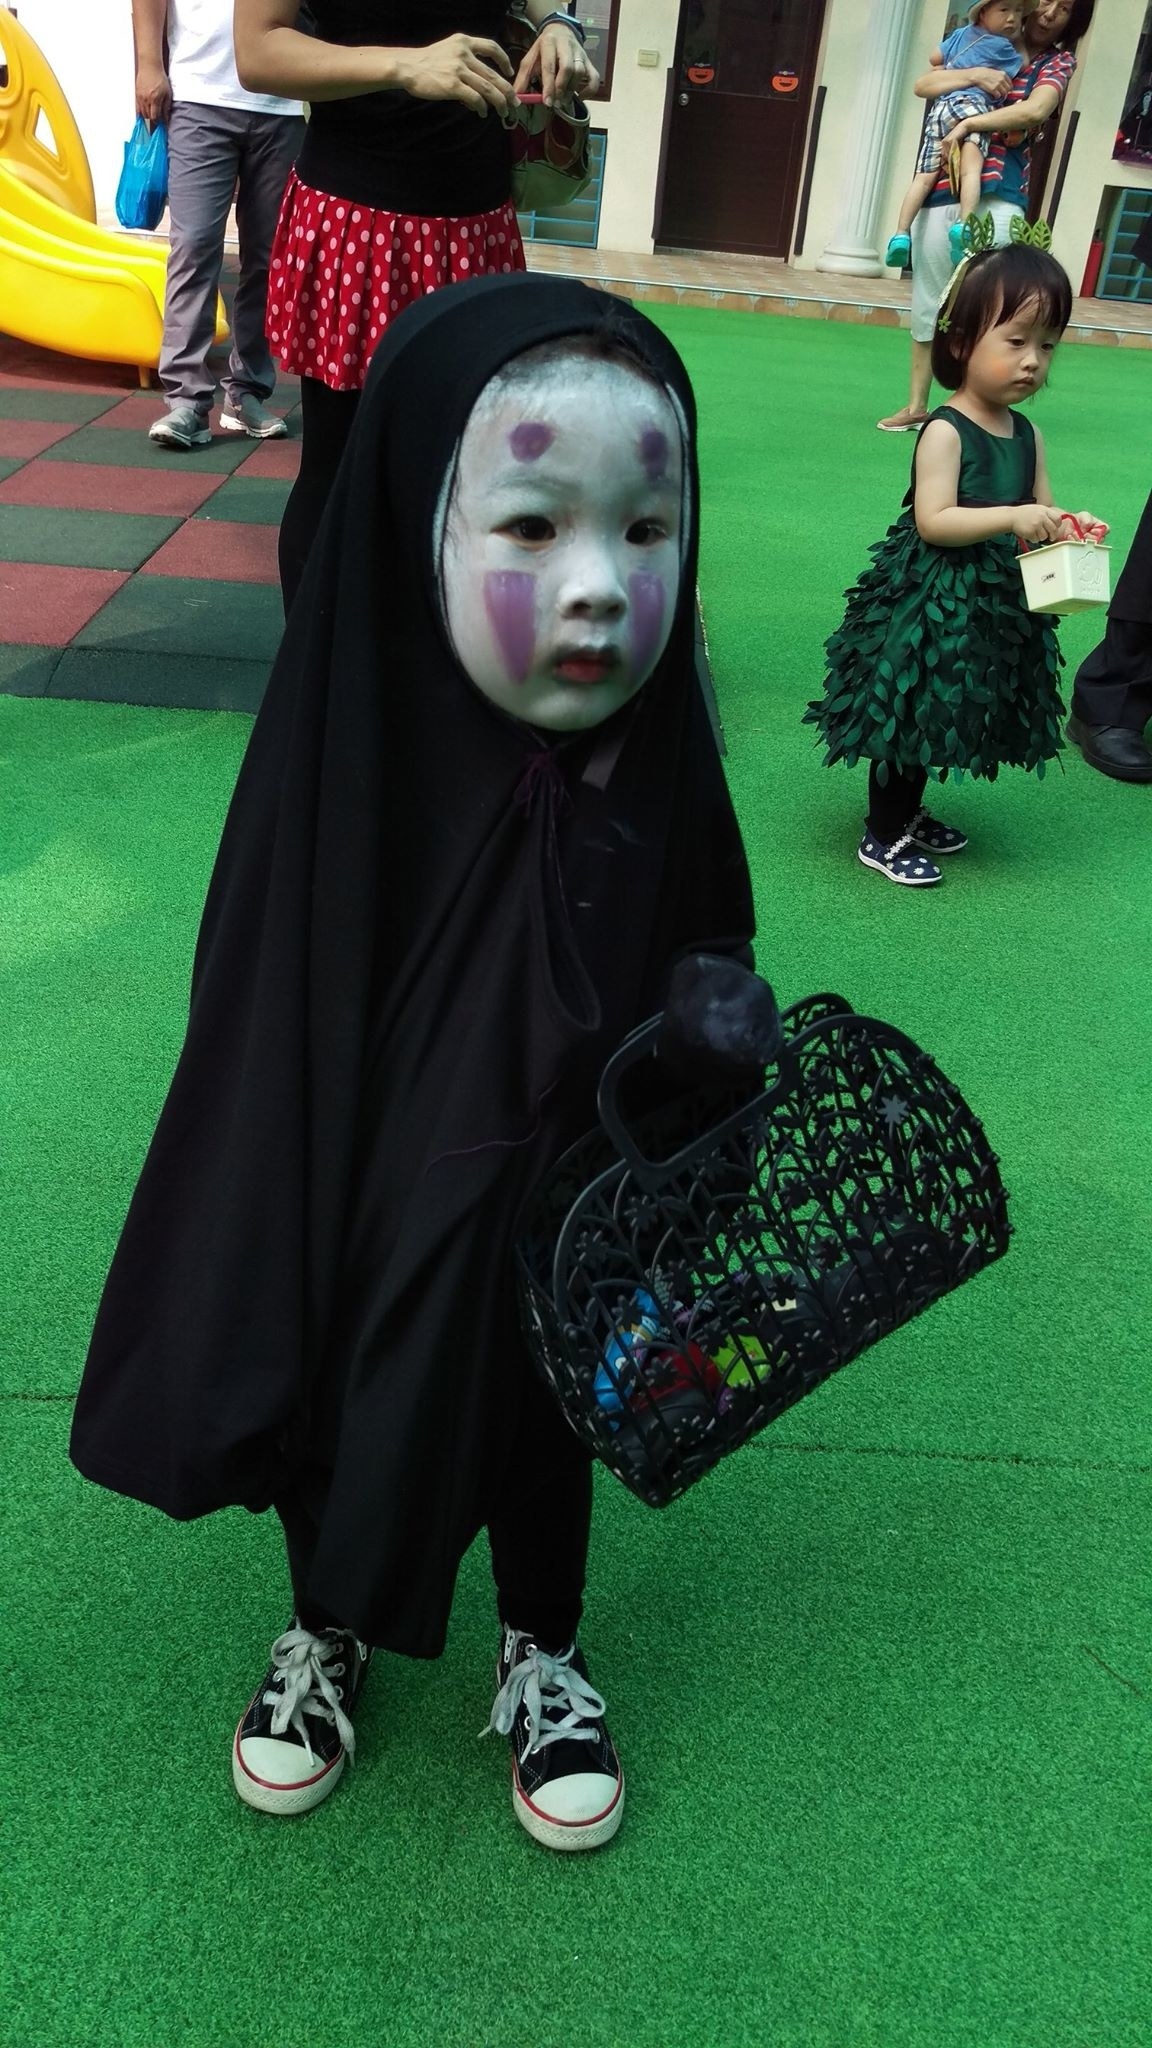 The Little Girl Who Dressed Up As No-Face Last Year Has Possibly Just Outdone Herself